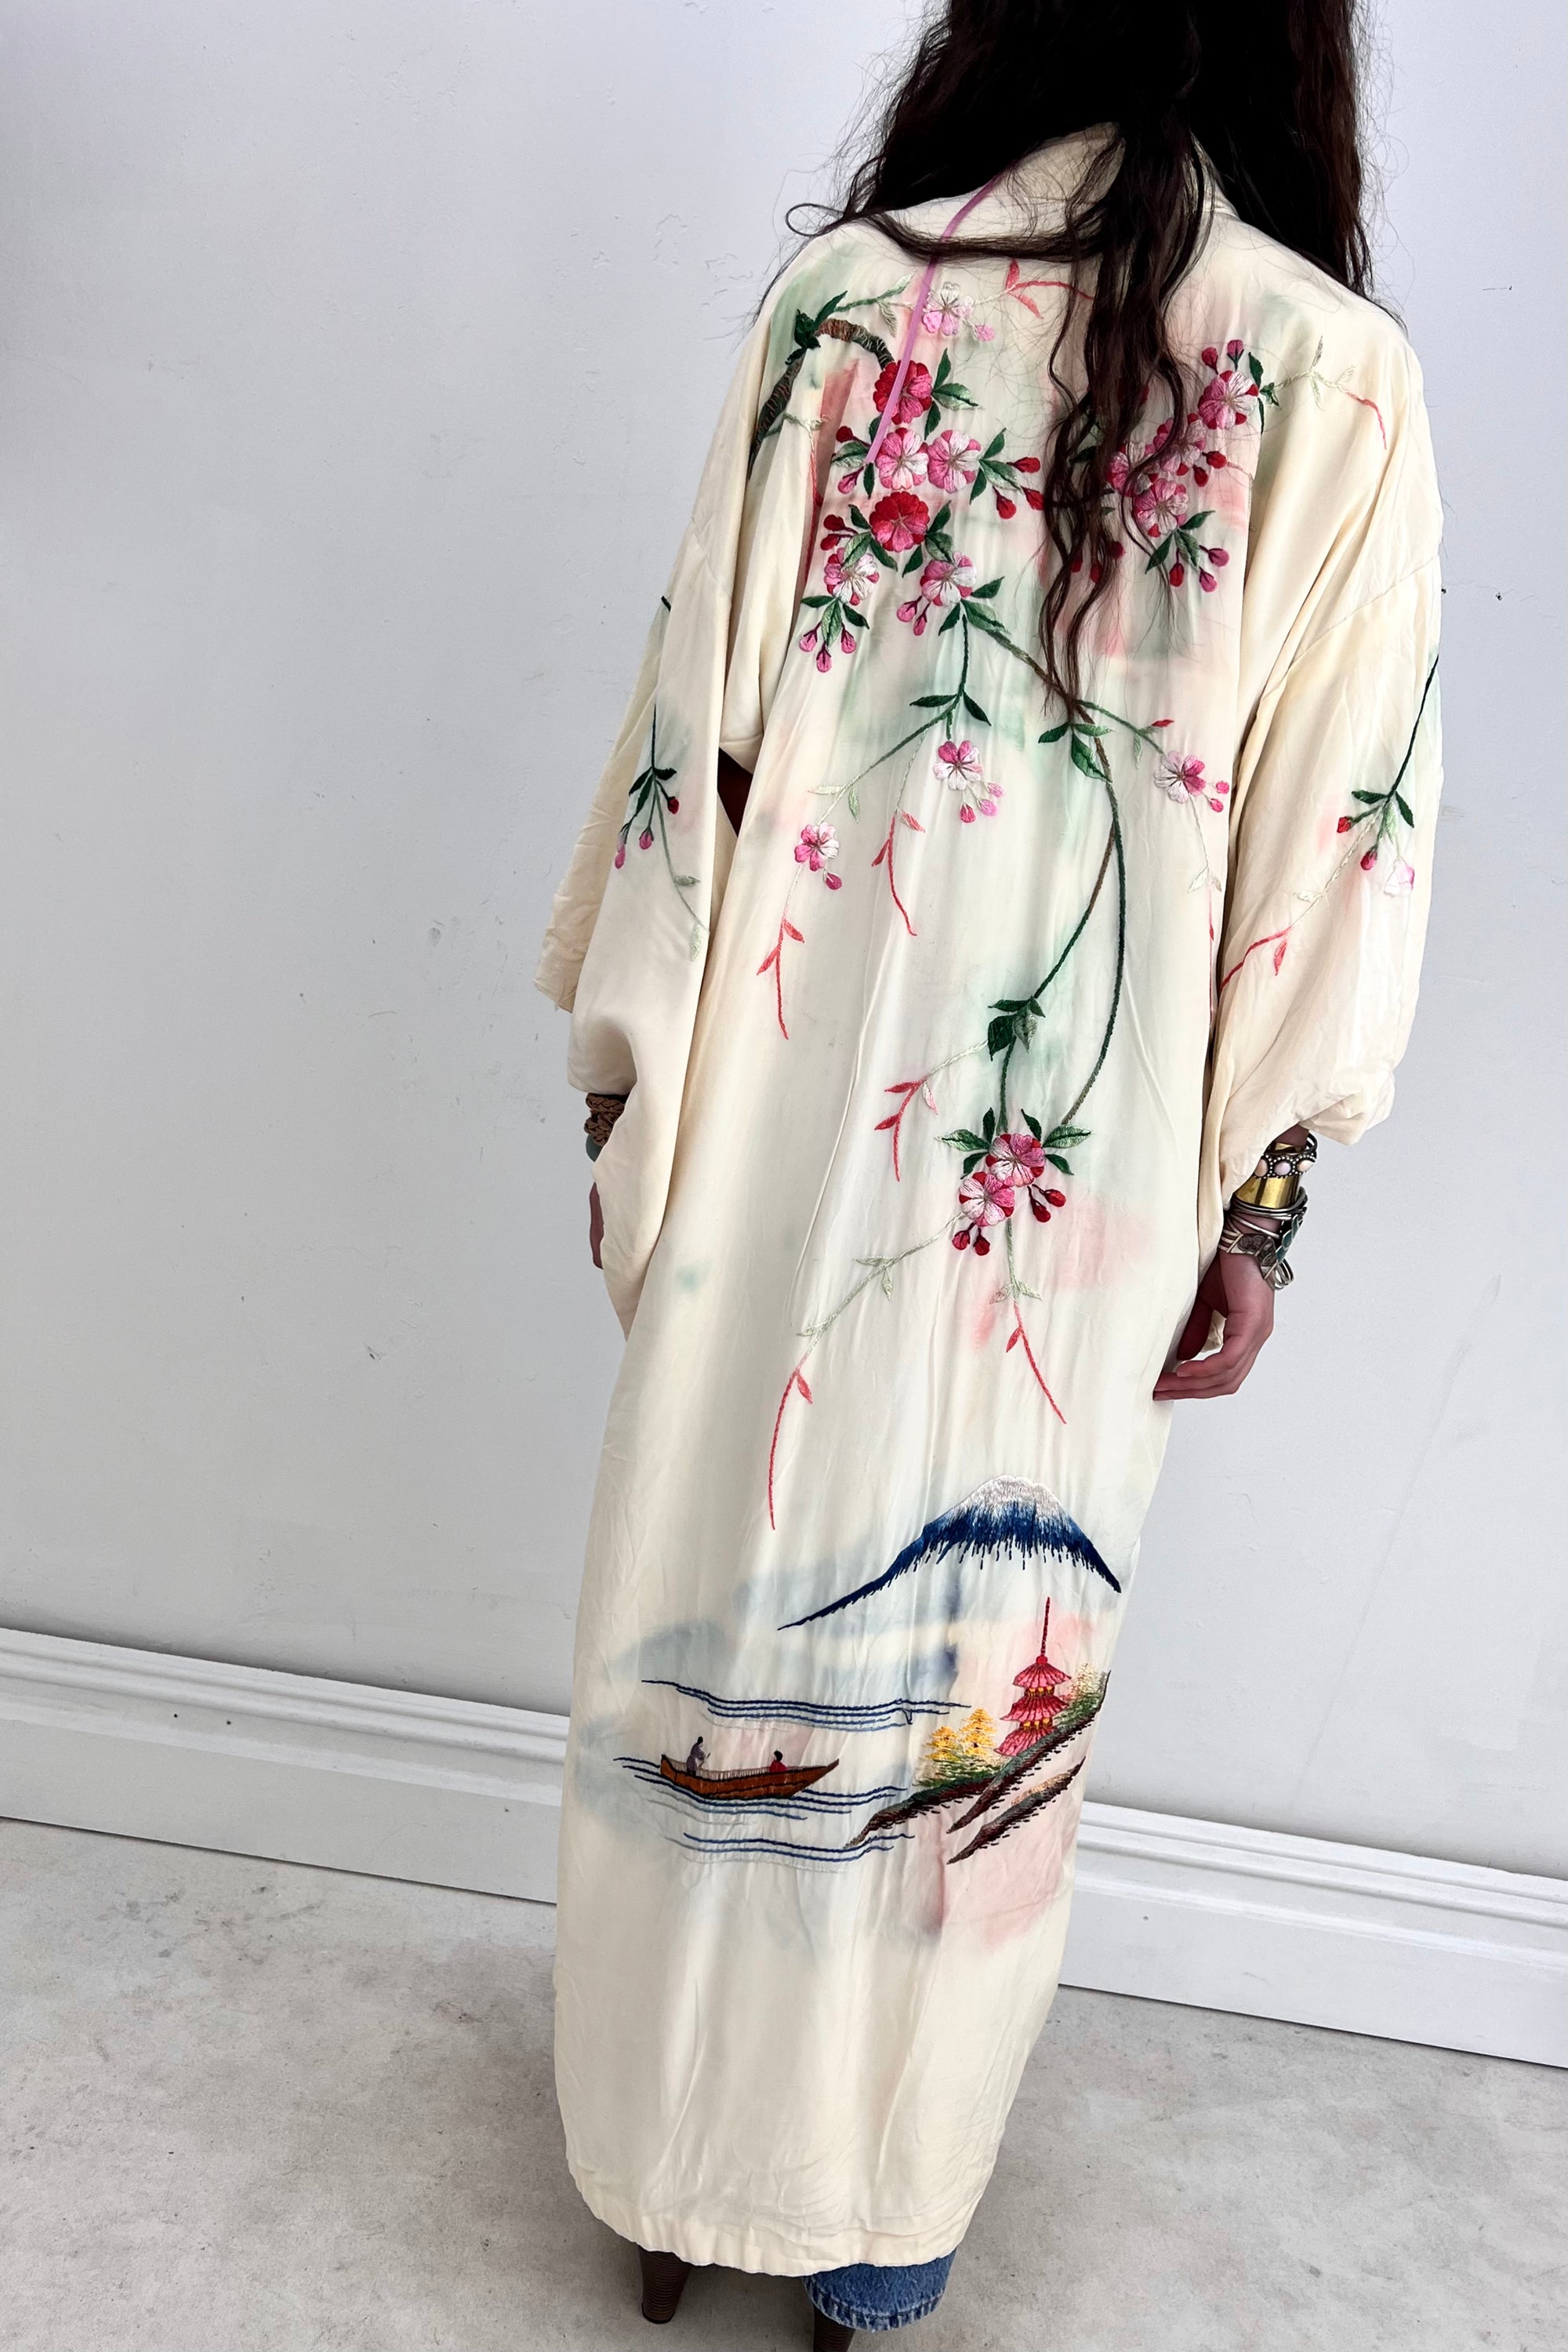 Vintage Watercolor Emroidered Kimono Selected by Anna Corinna